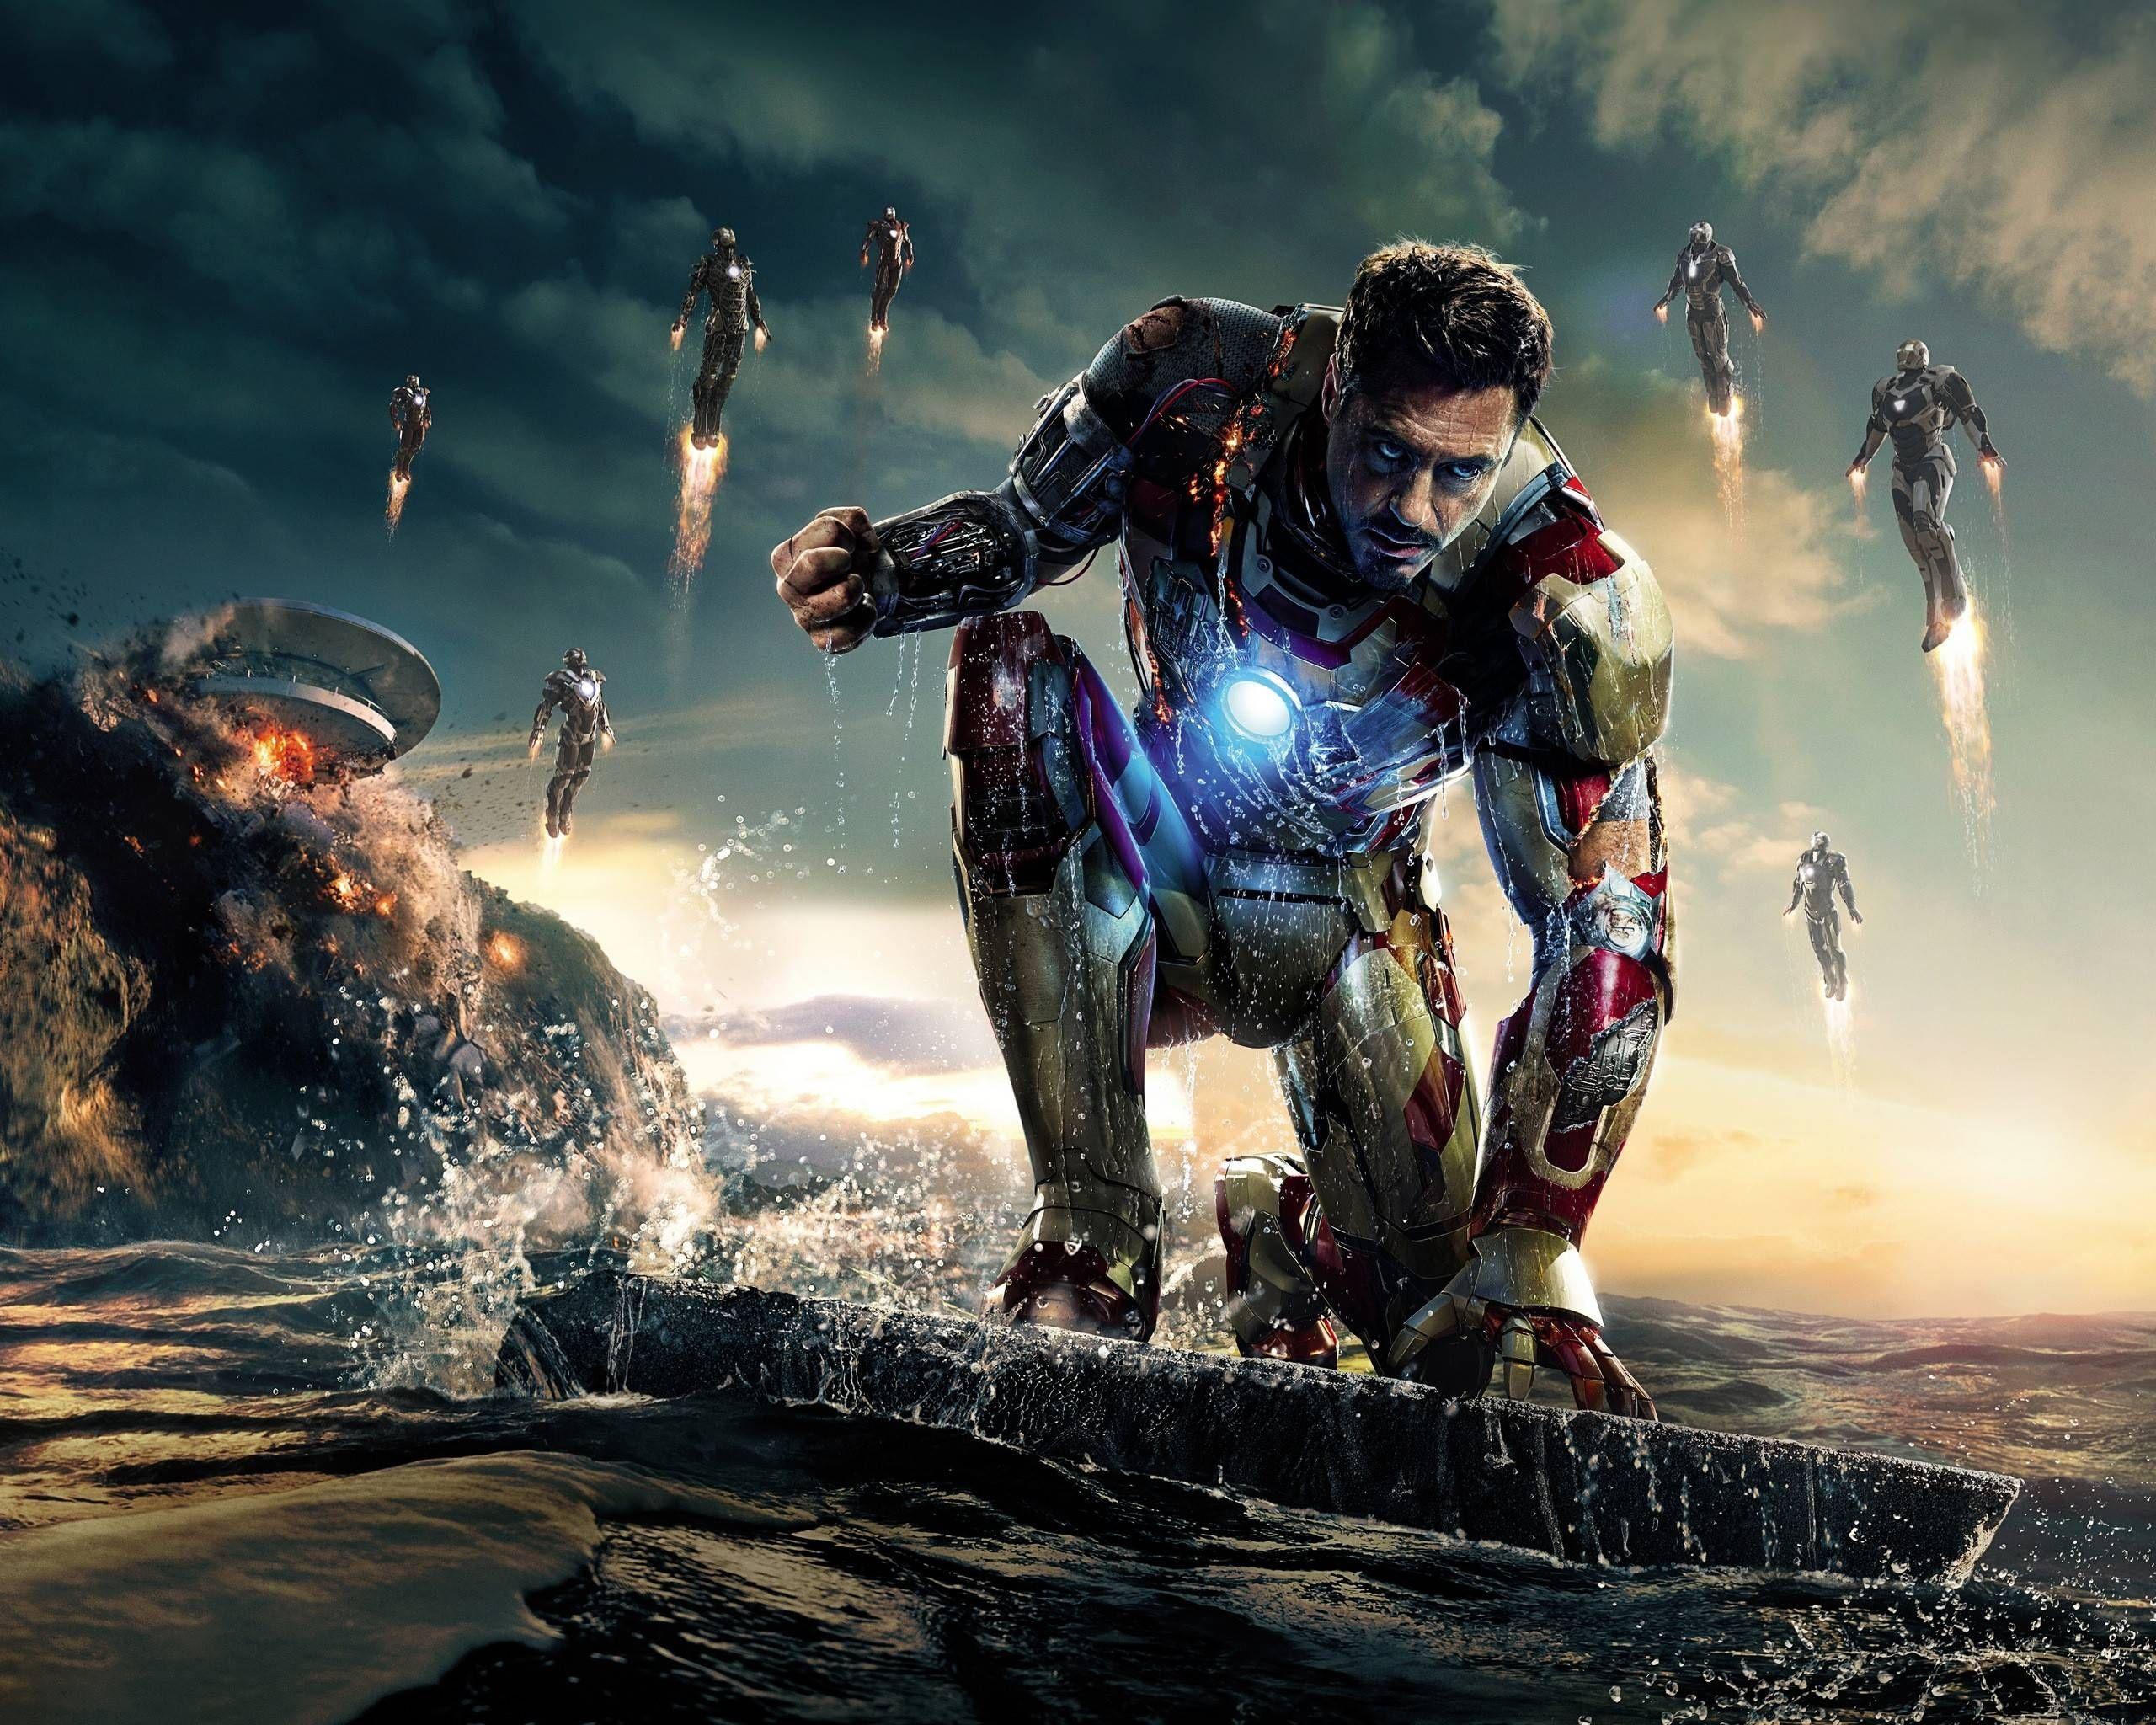 Comic books movies games blog everything related to fiction source  Presented by LEAGUE OF FICTION Iron man 3 Desktop Wallpaper HD Backgrounds